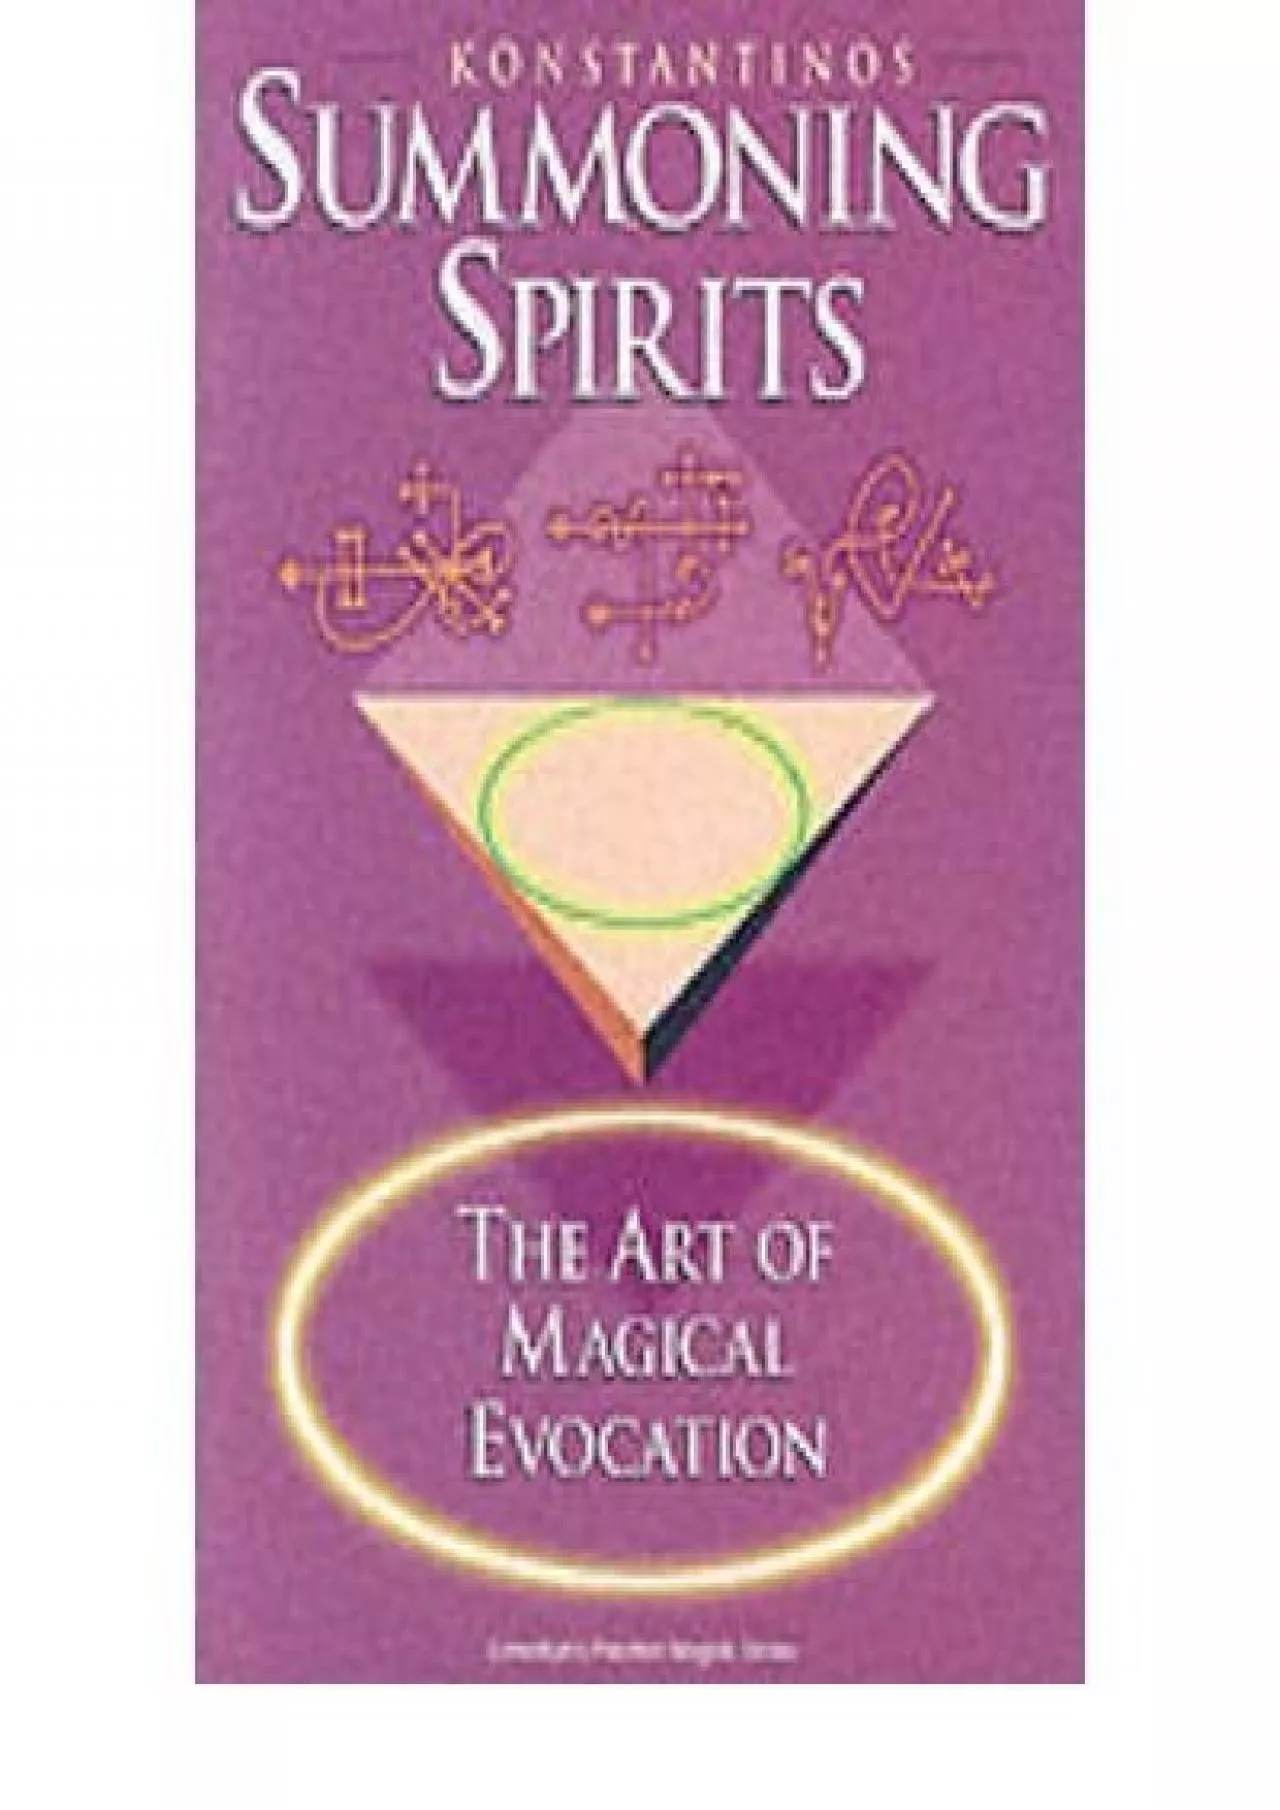 [READING BOOK]-Summoning Spirits: The Art of Magical Evocation (Llewellyn\'s Practical